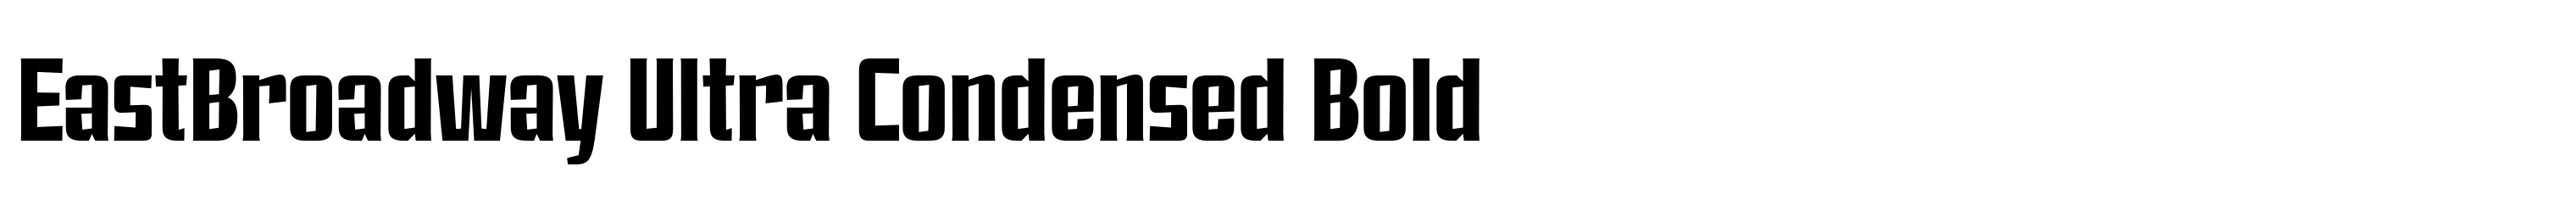 EastBroadway Ultra Condensed Bold